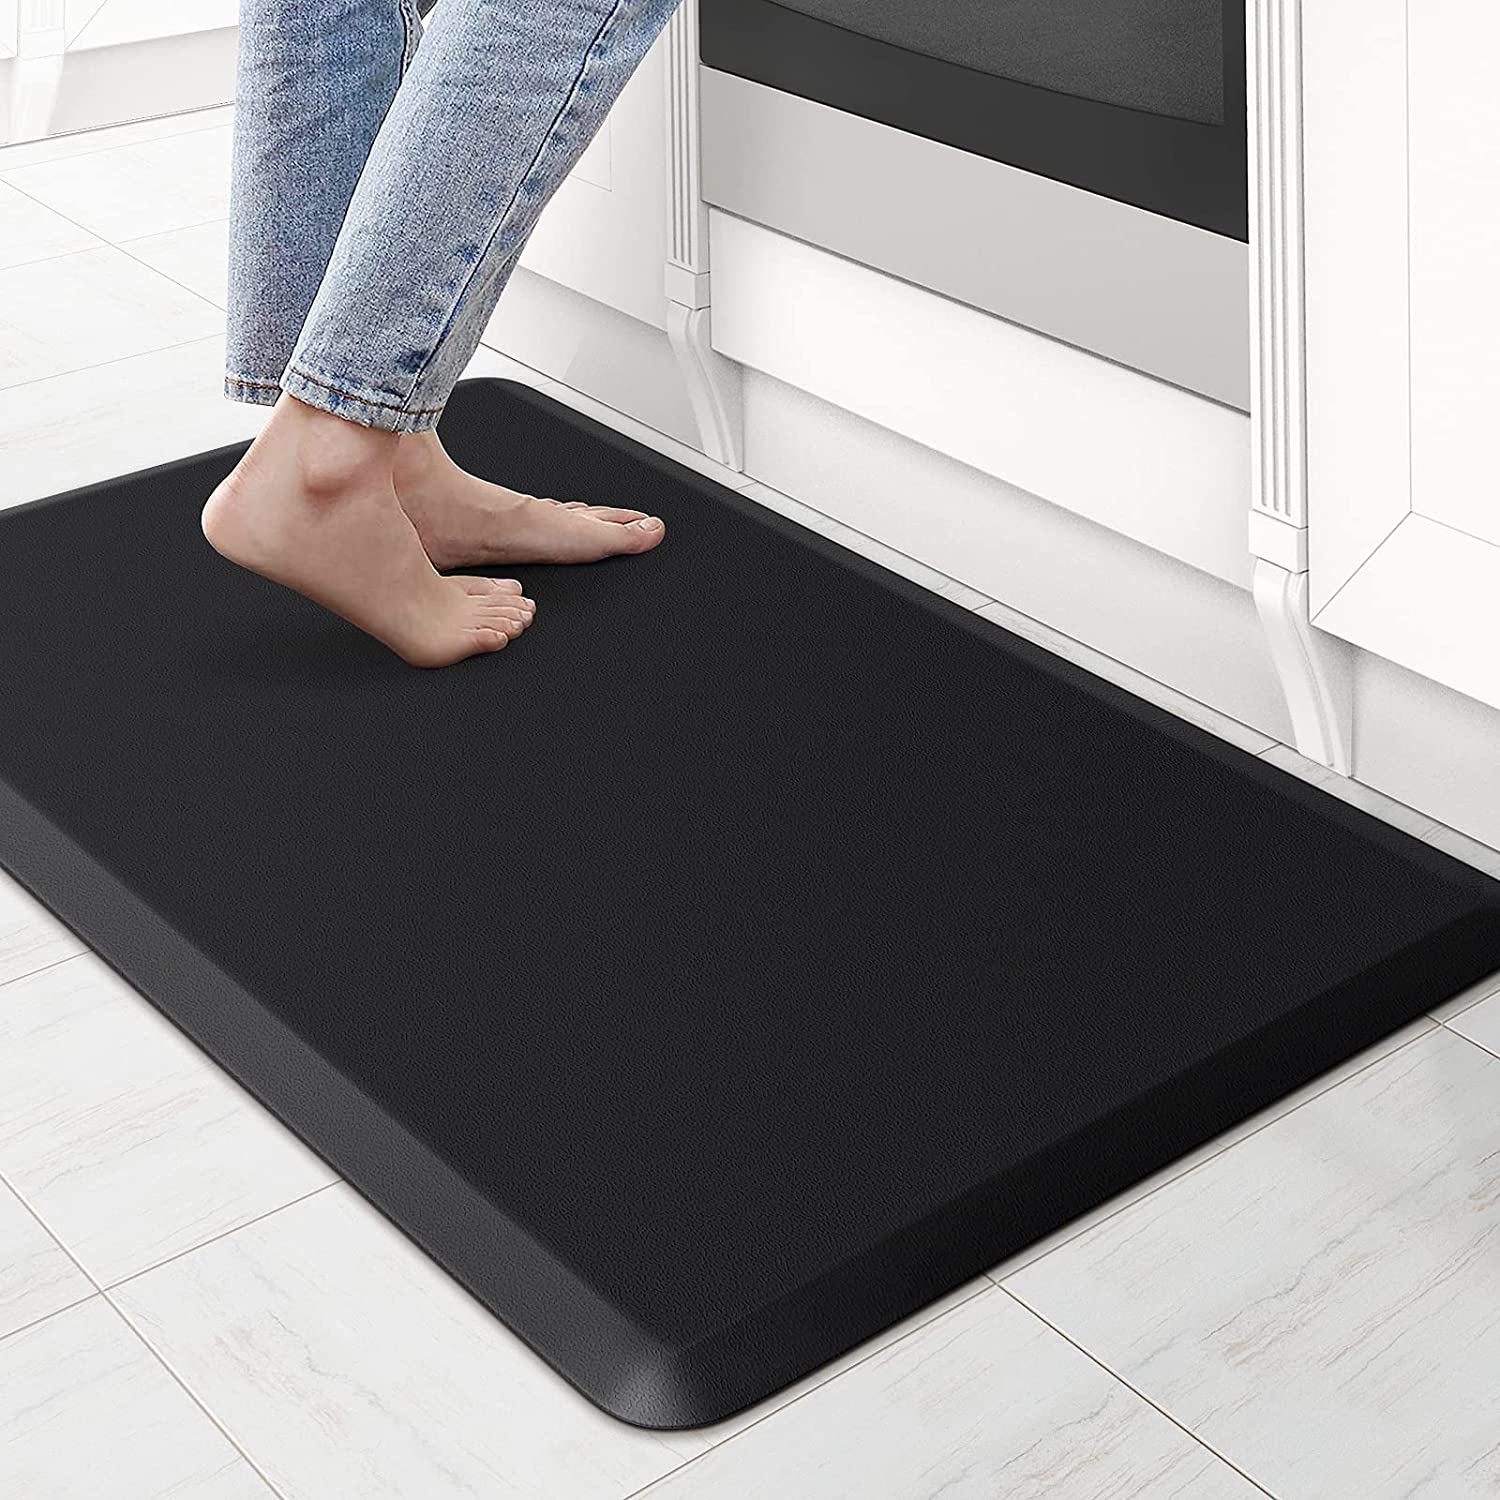 https://www.dontwasteyourmoney.com/wp-content/uploads/2023/04/kitchenclouds-easy-clean-stain-resistant-anti-fatigue-kitchen-mat-anti-fatigue-kitchen-mat.jpg